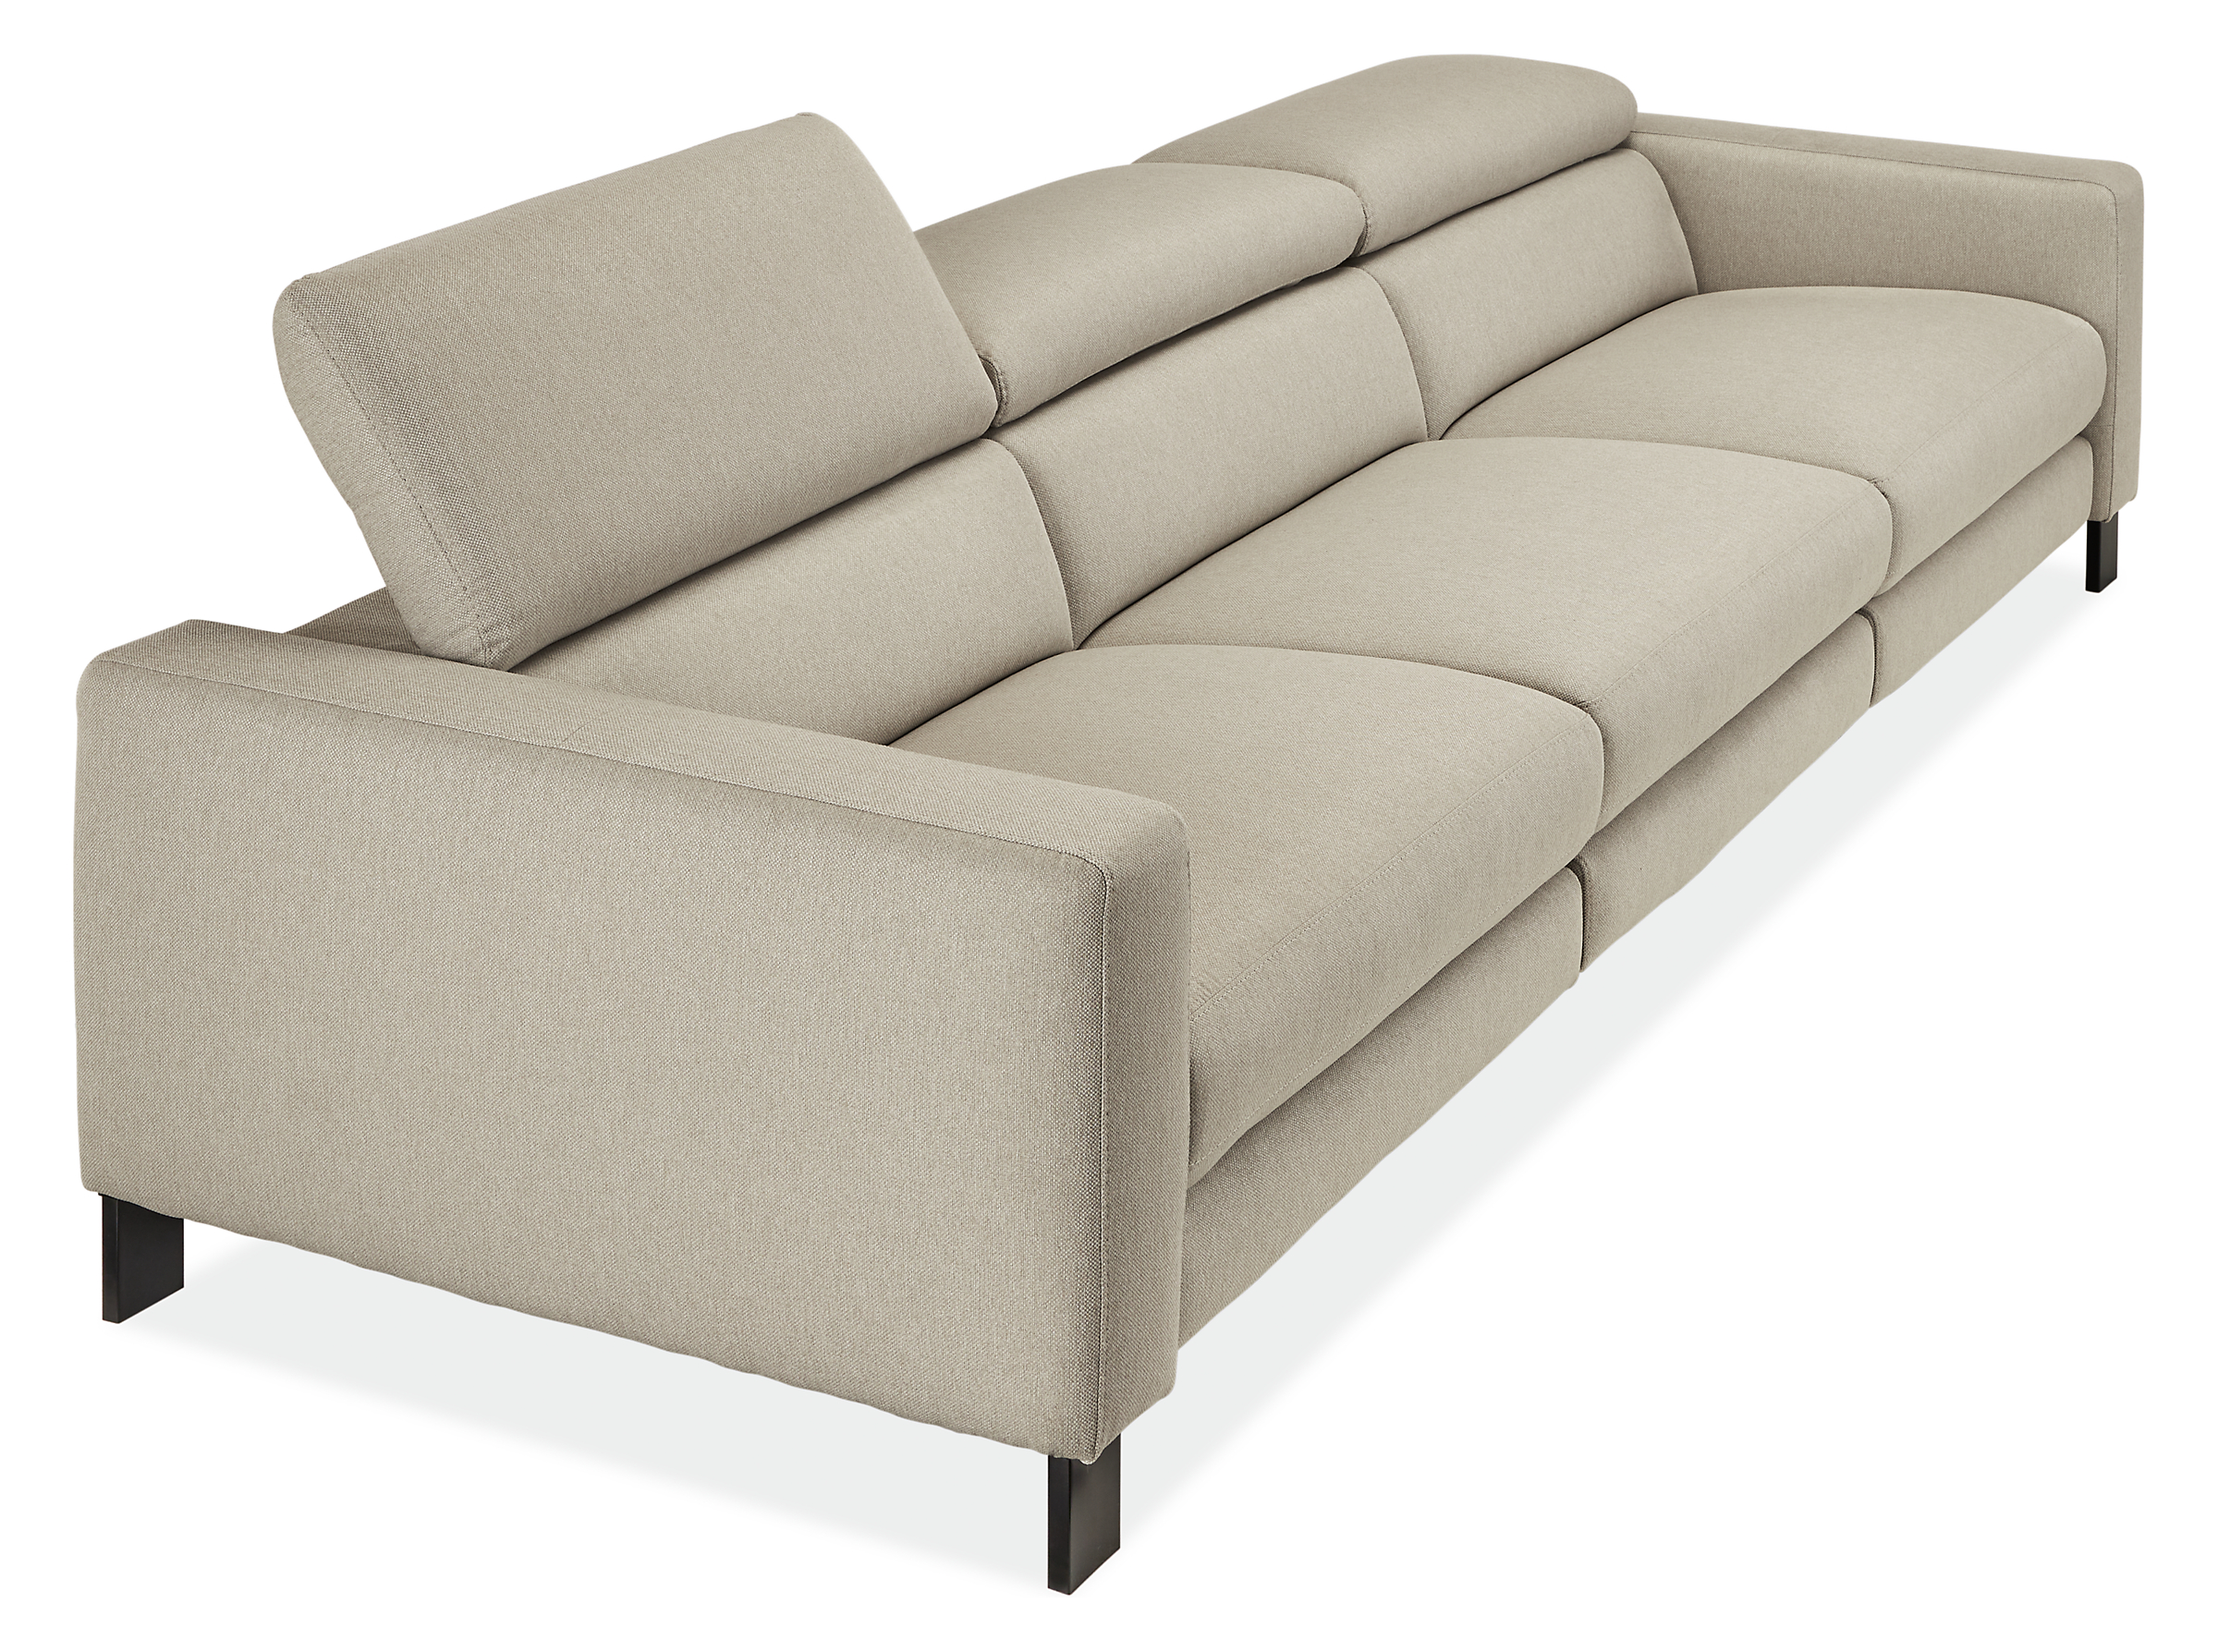 detail of gray Elio sofa with 1 headrest extended nearly fully.